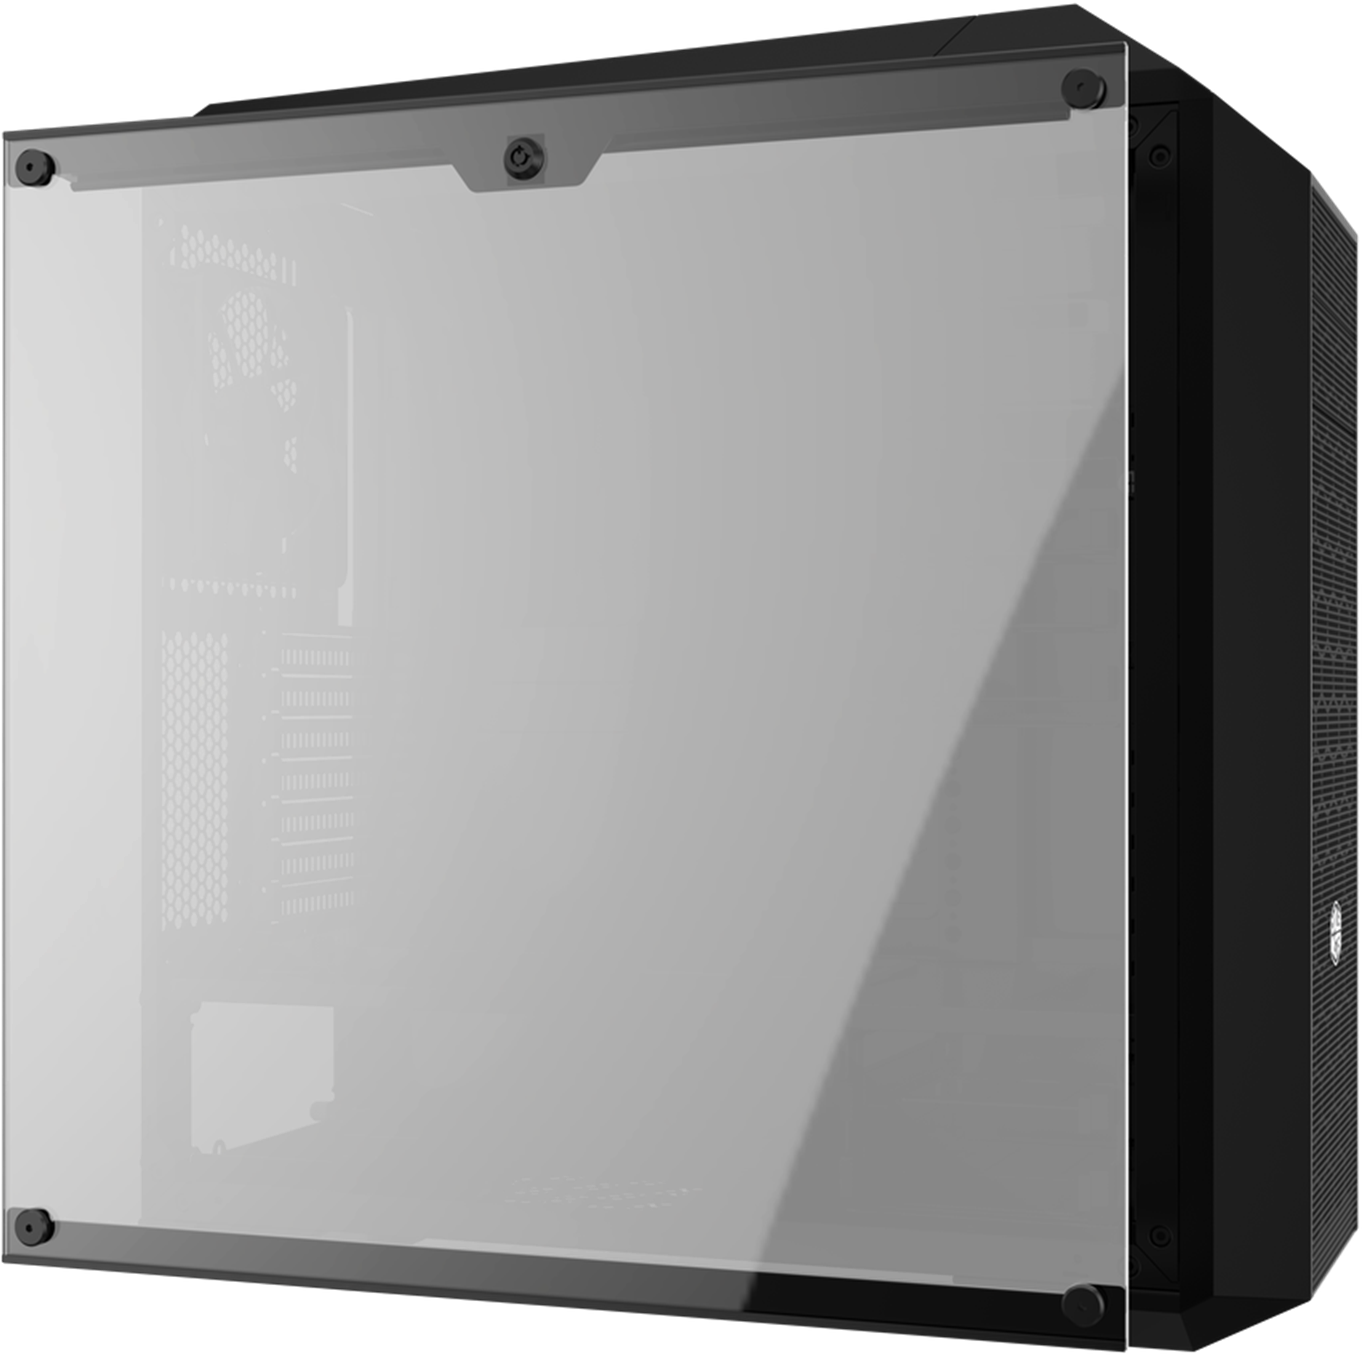 Picture Of Masteraccessory Tempered Glass Side Panel - Cooler Master Mastercase Tempered Glass (2048x1448), Png Download